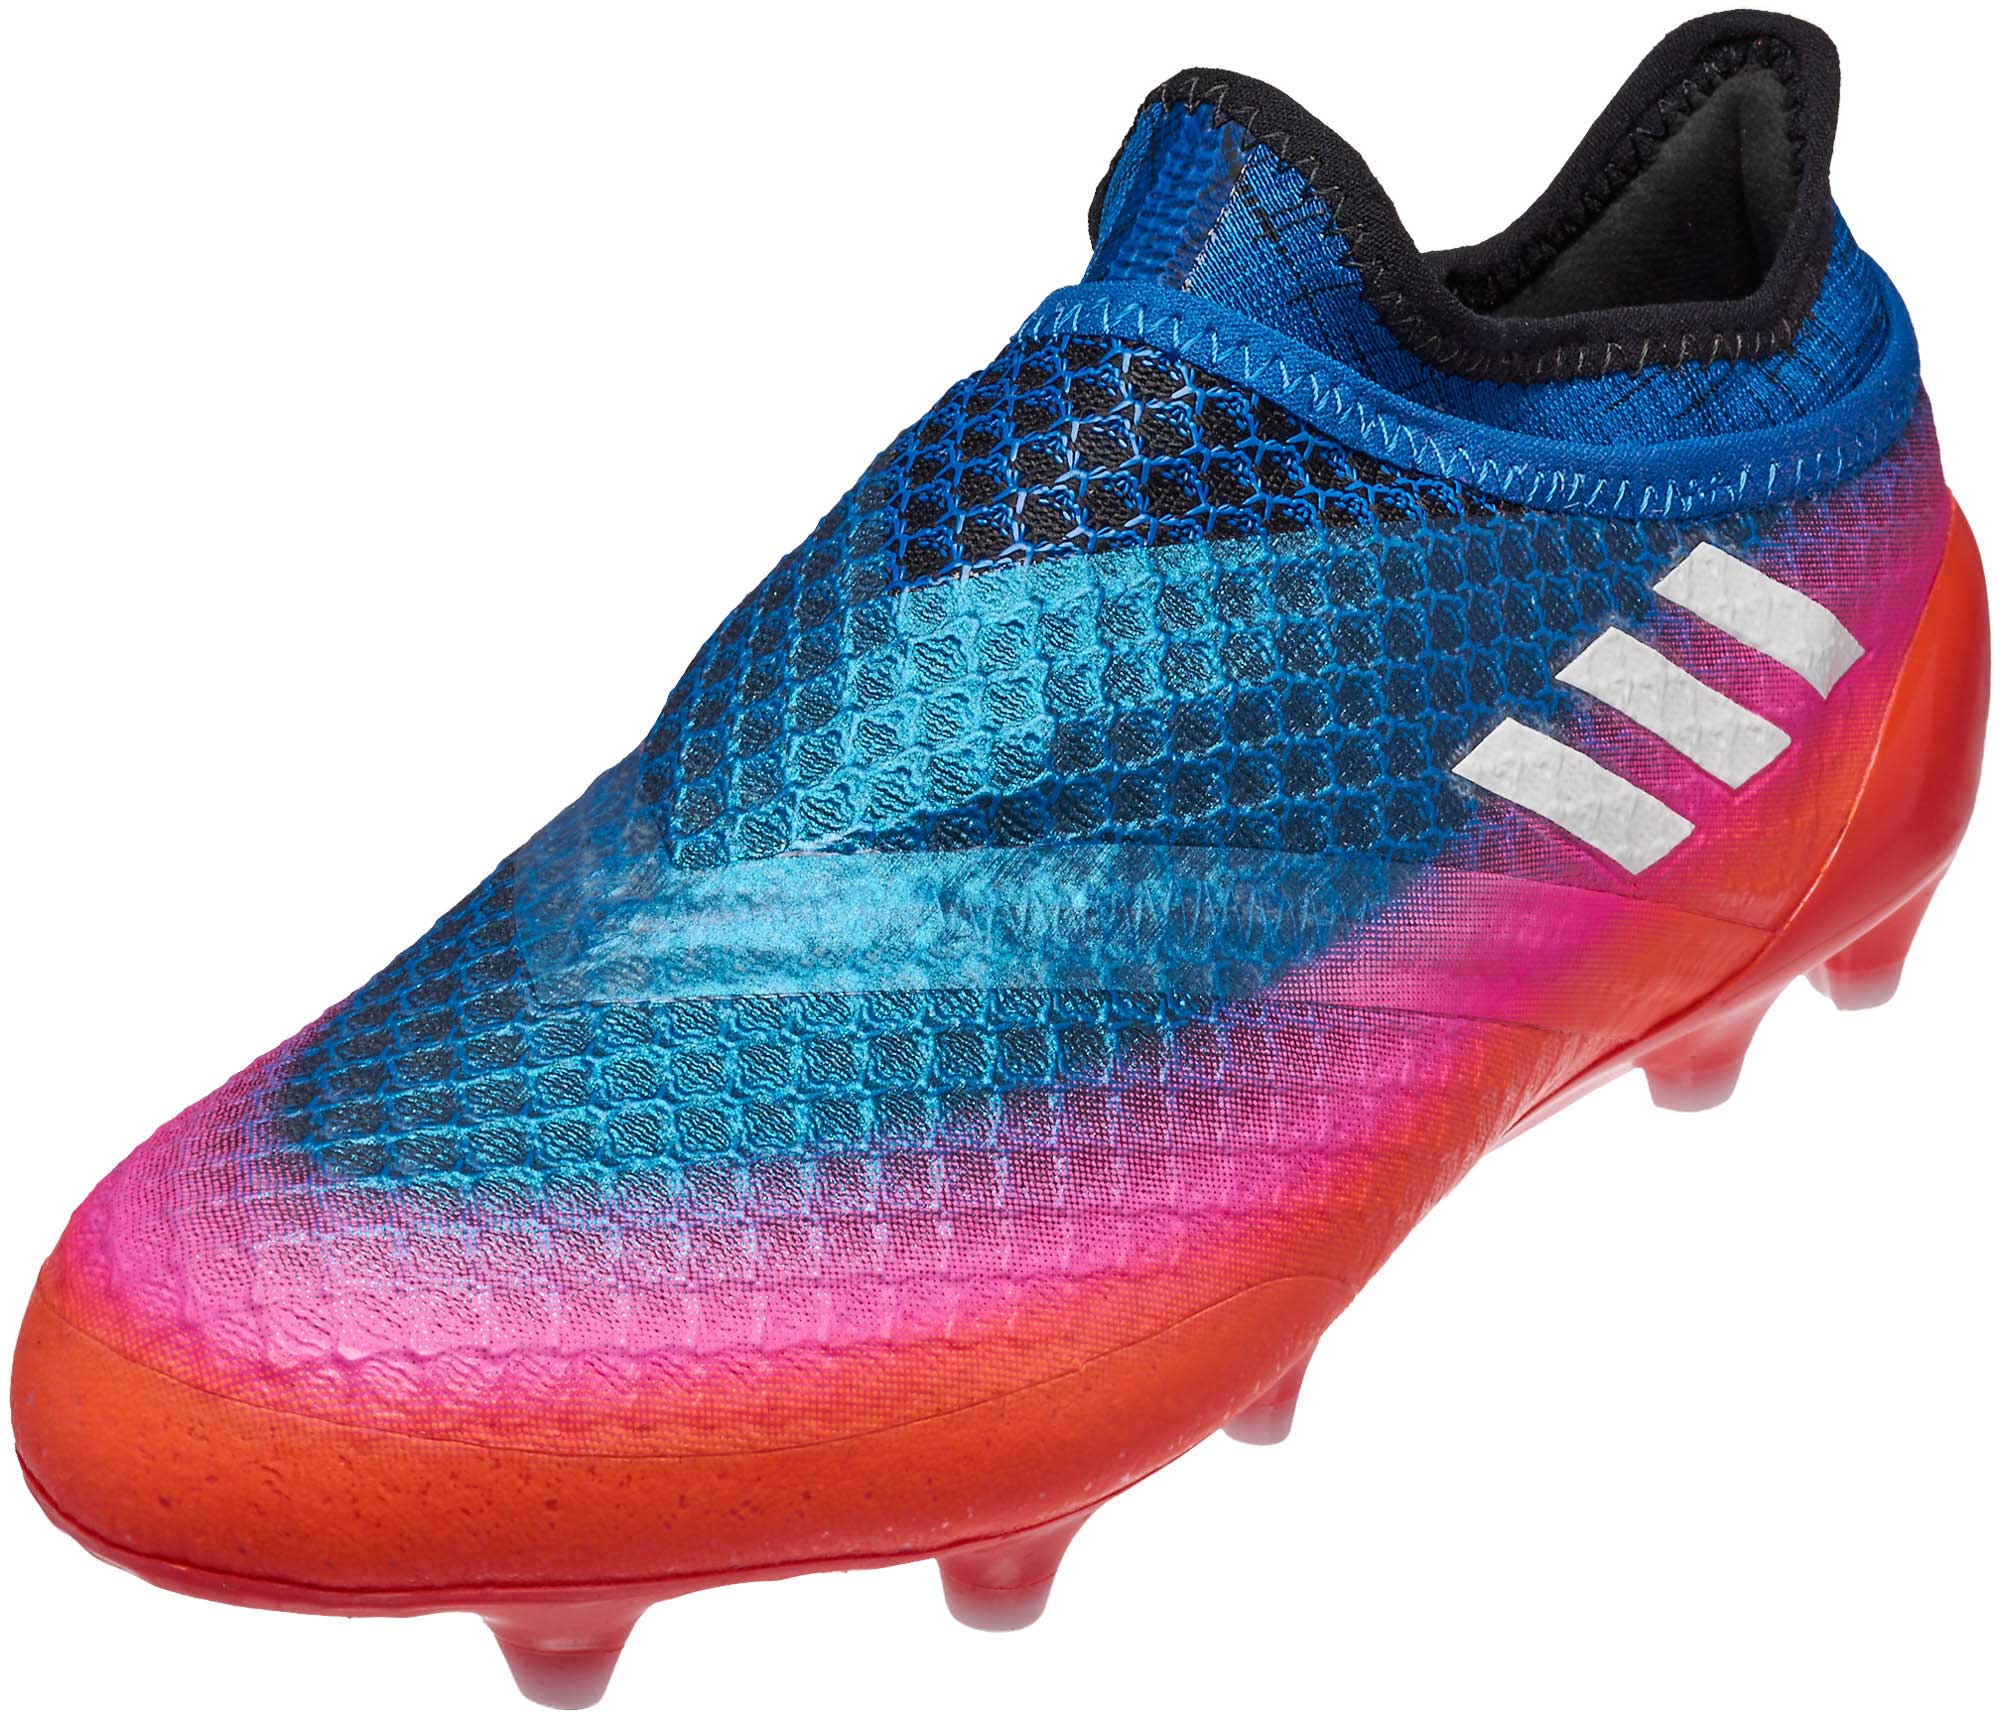 messi cleats youth